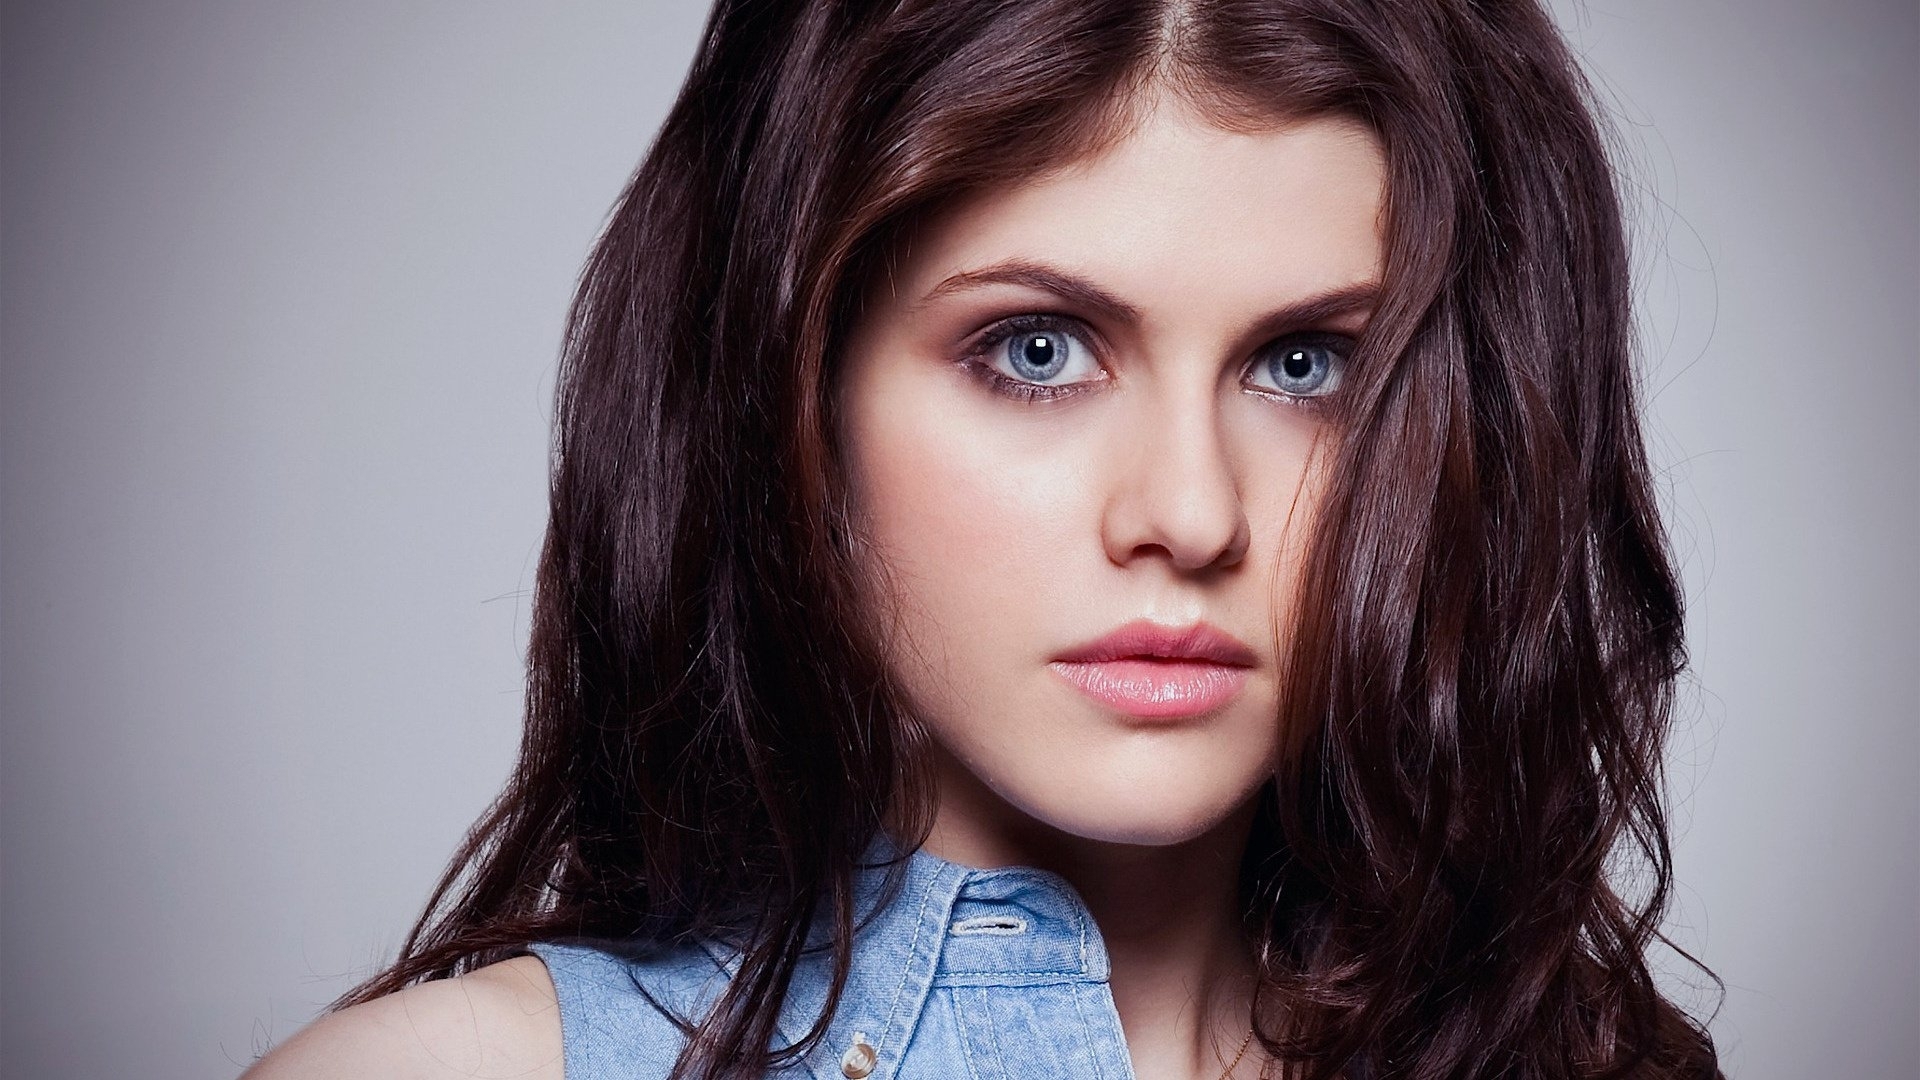 10 Most Popular Alexandra Daddario Wallpapers Hd FULL HD 1920×1080 For PC Background